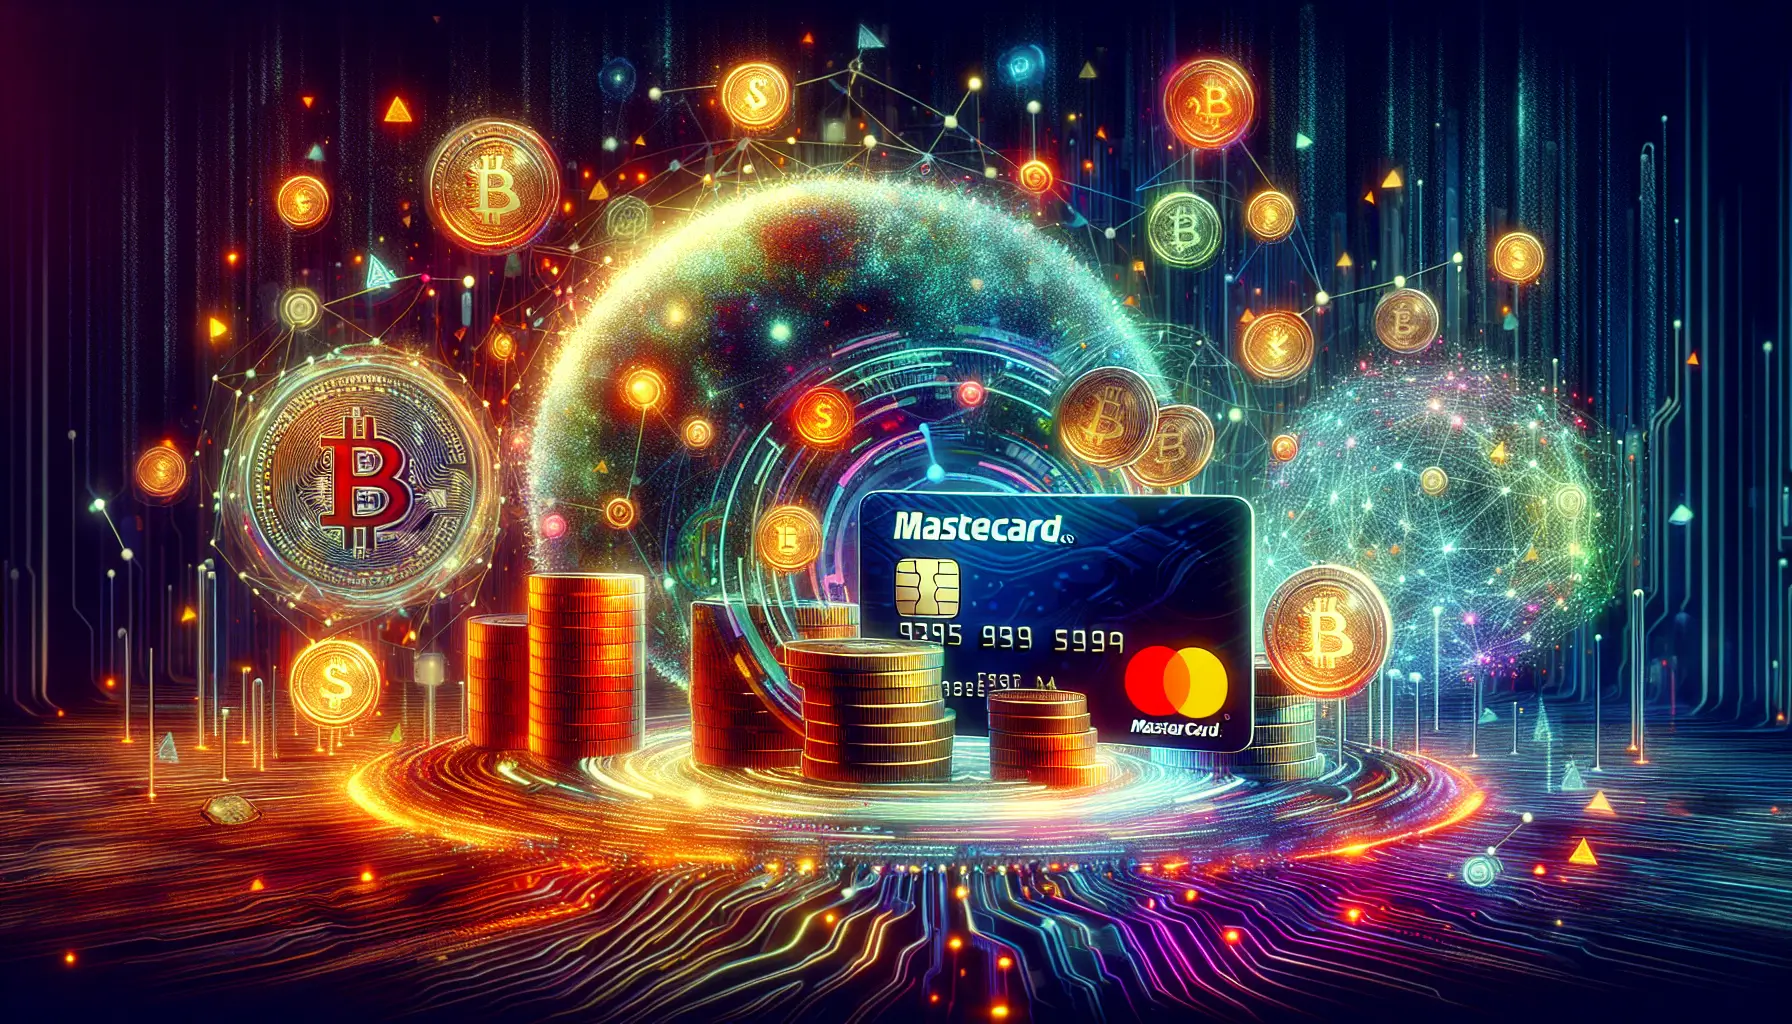 Key Features of Mastercard Crypto Credential